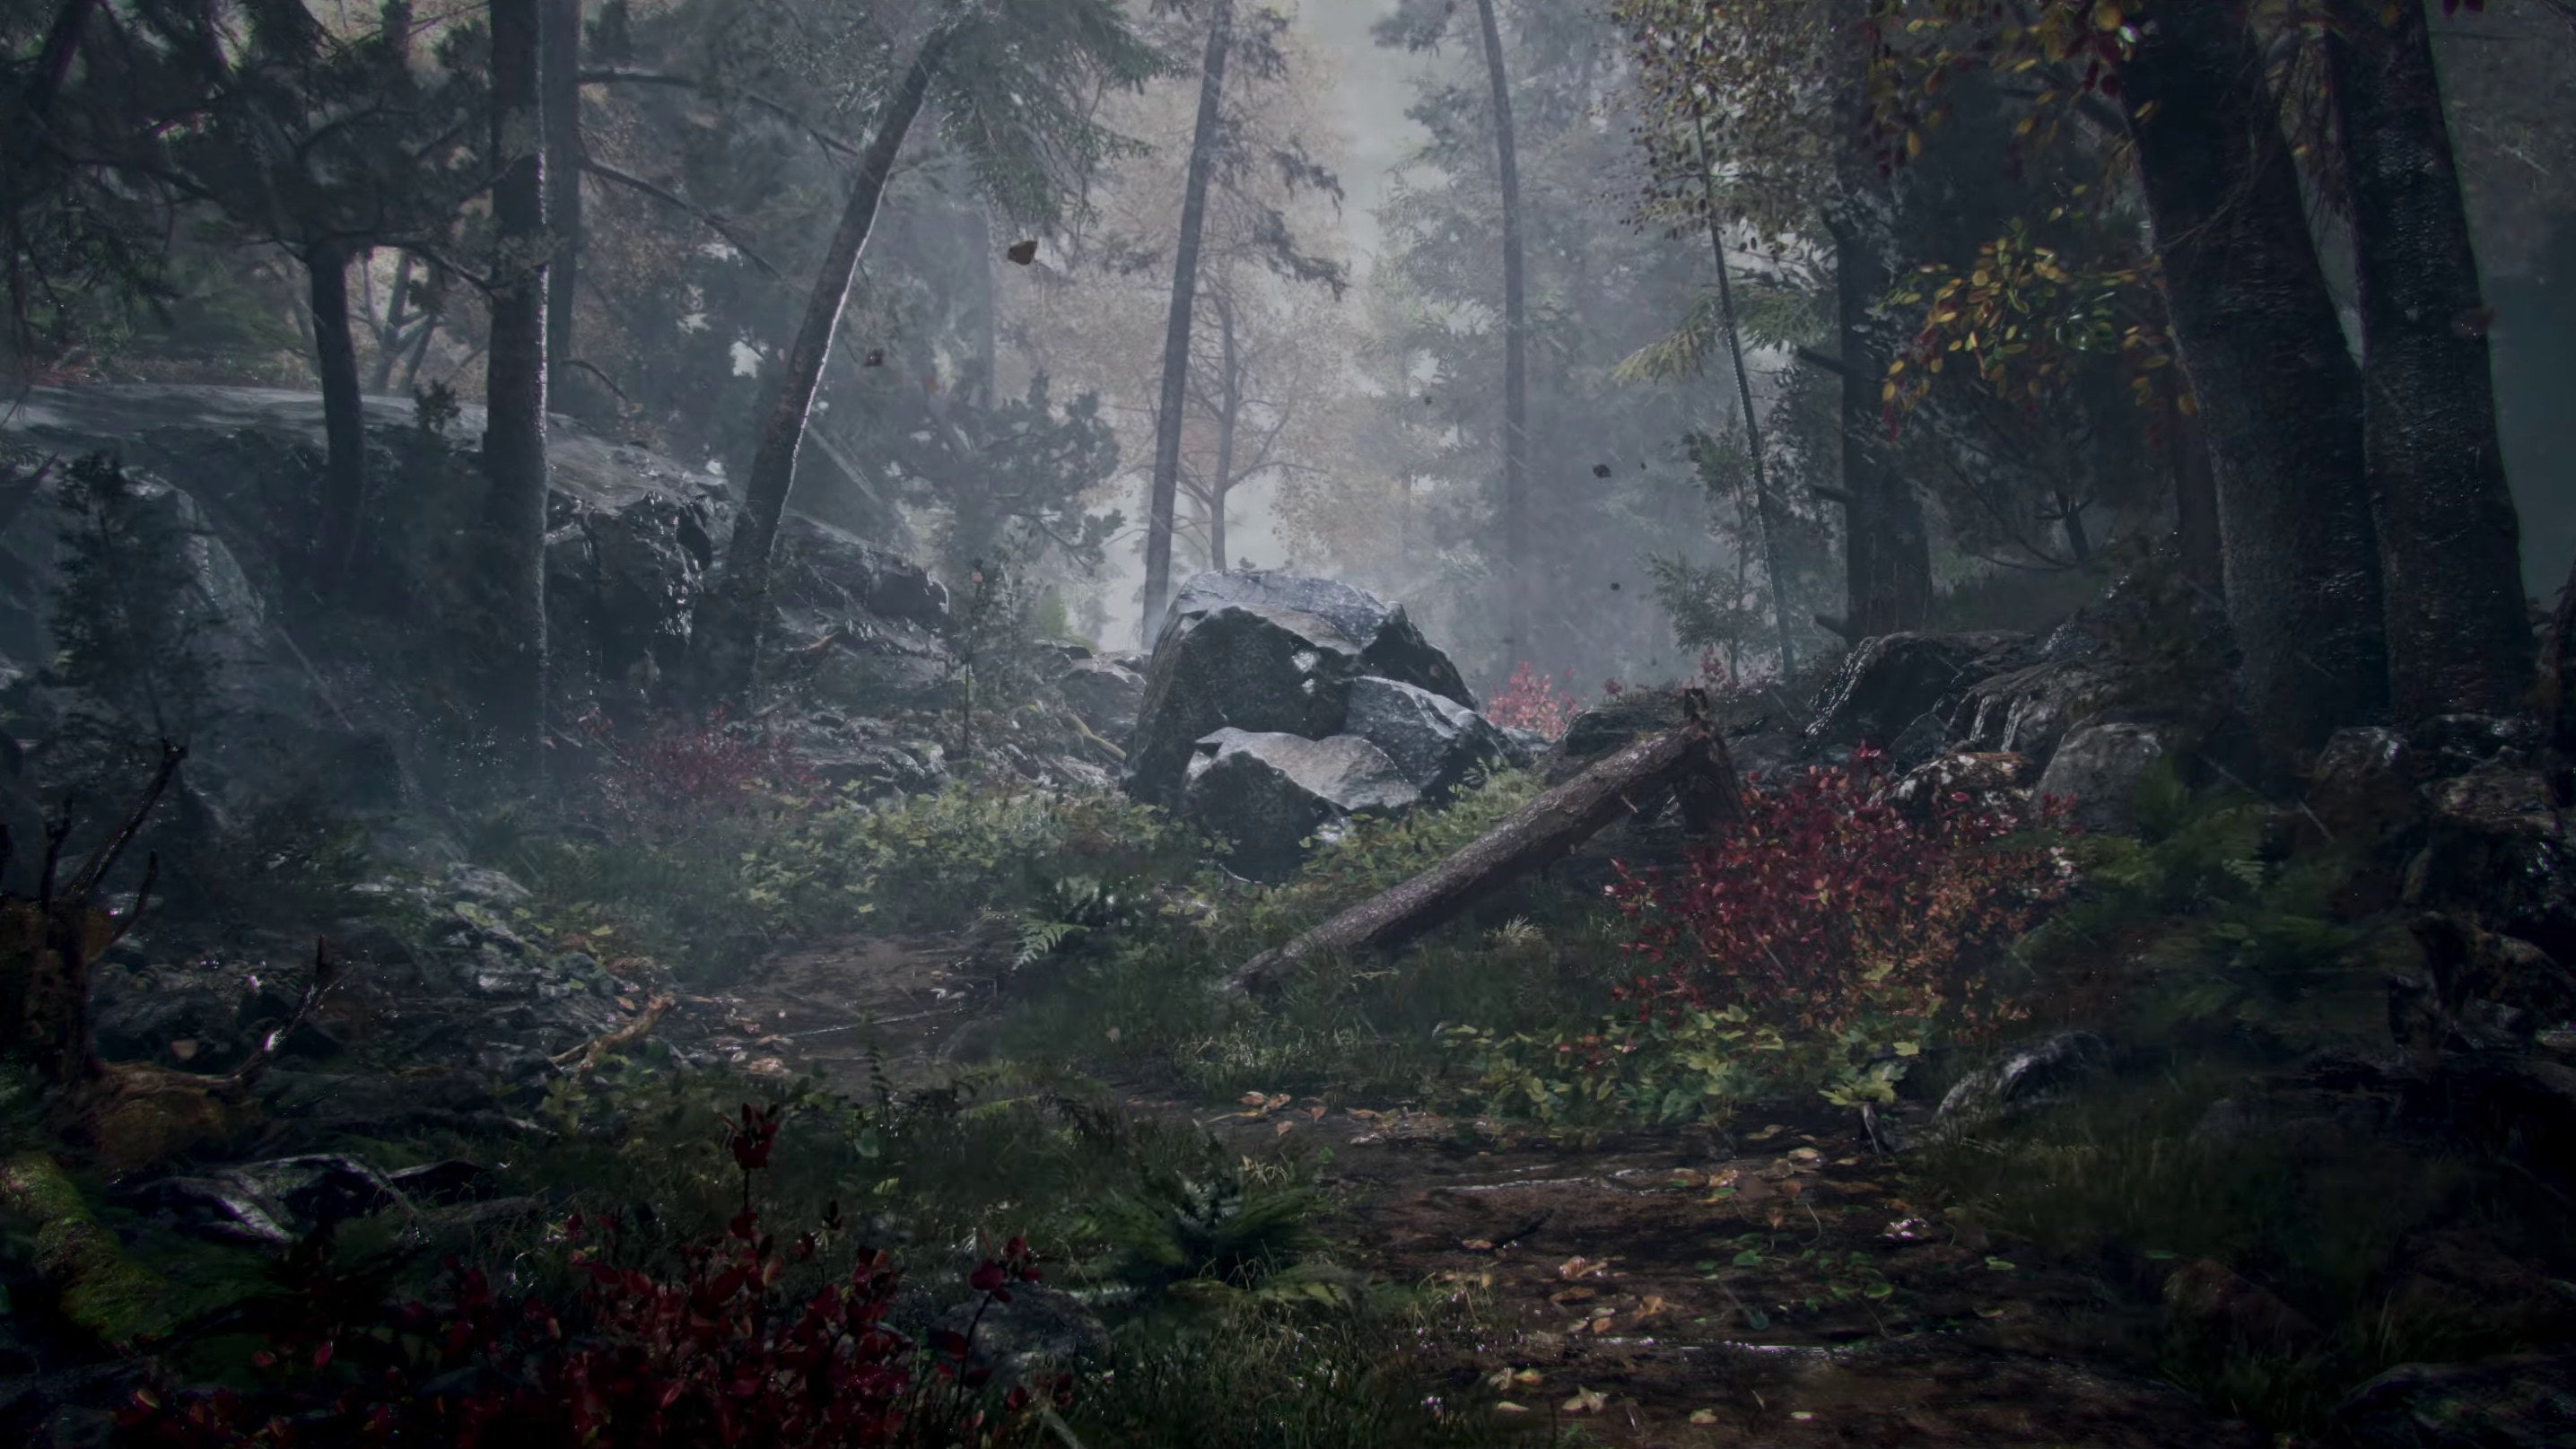 Prologue- A dark and rainy forest with rocky outcroppings